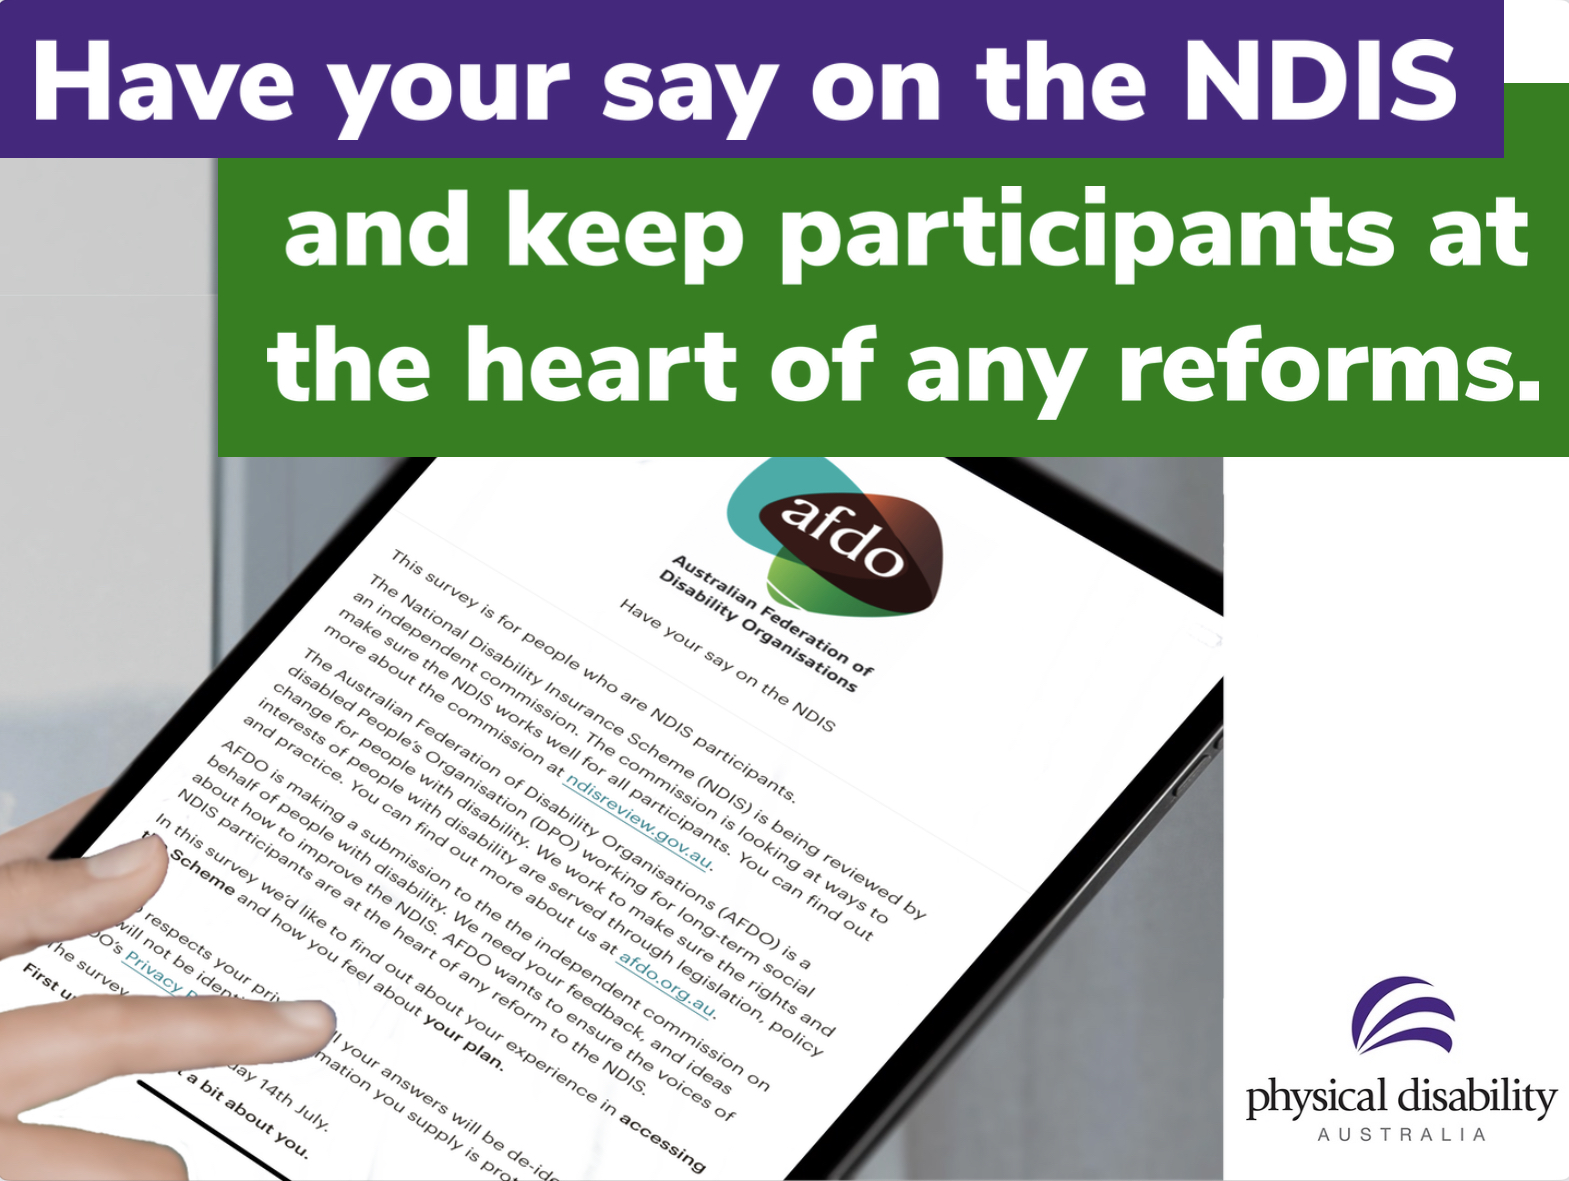 We need your feedback and ideas around improving the NDIS.